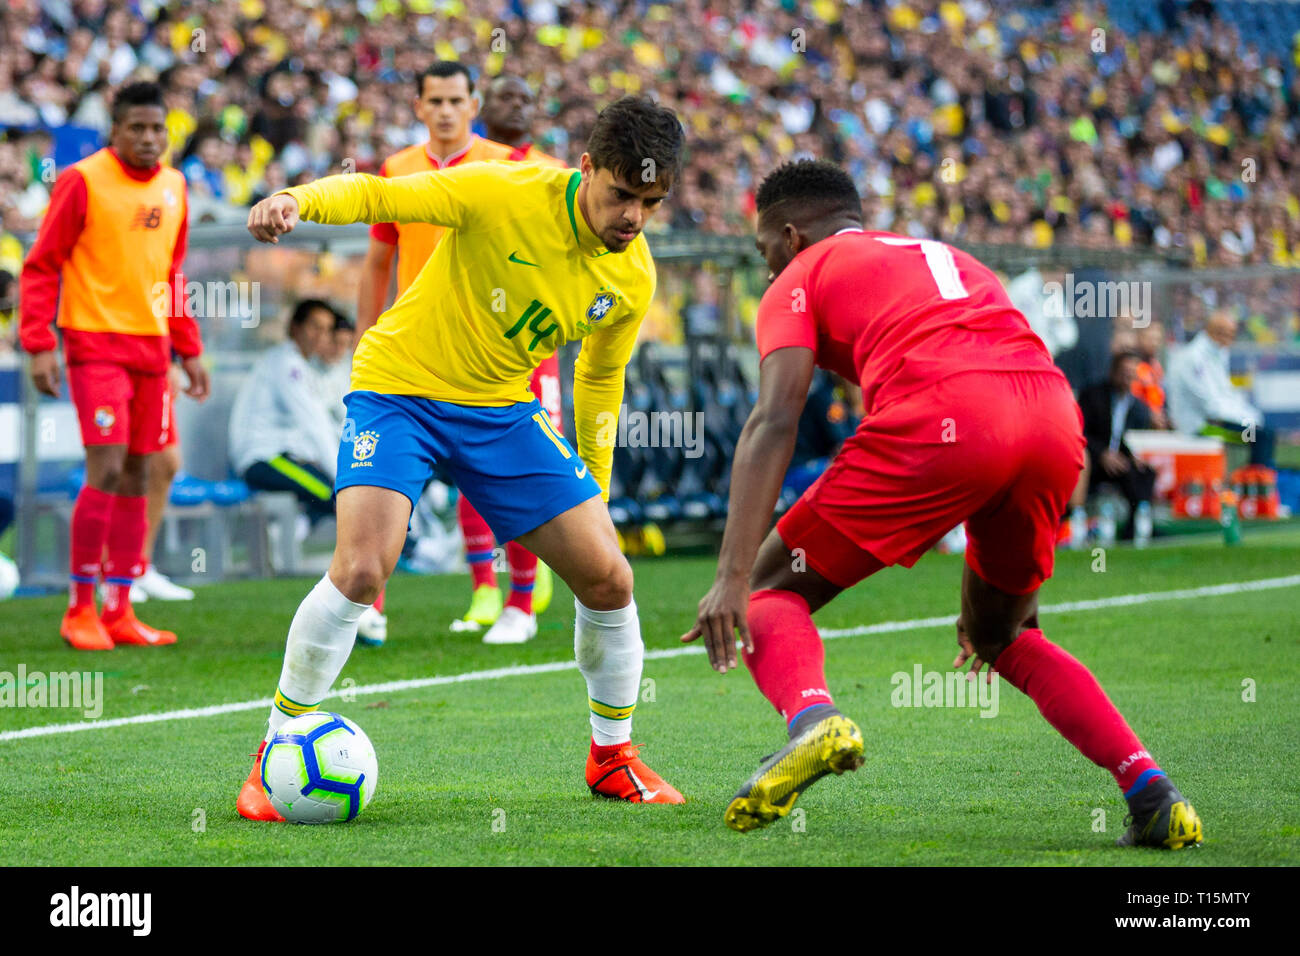 Porto, Portugal. 23rd Mar, 2019. Brasil player Fagner Lemos (L) vies for the ball with Panama player Fidel Escobar (R) during the match ffor the Brasil Global Tour at Dragon Stadium, Porto, Portugal. Credit: Diogo Baptista/Alamy Live News Stock Photo